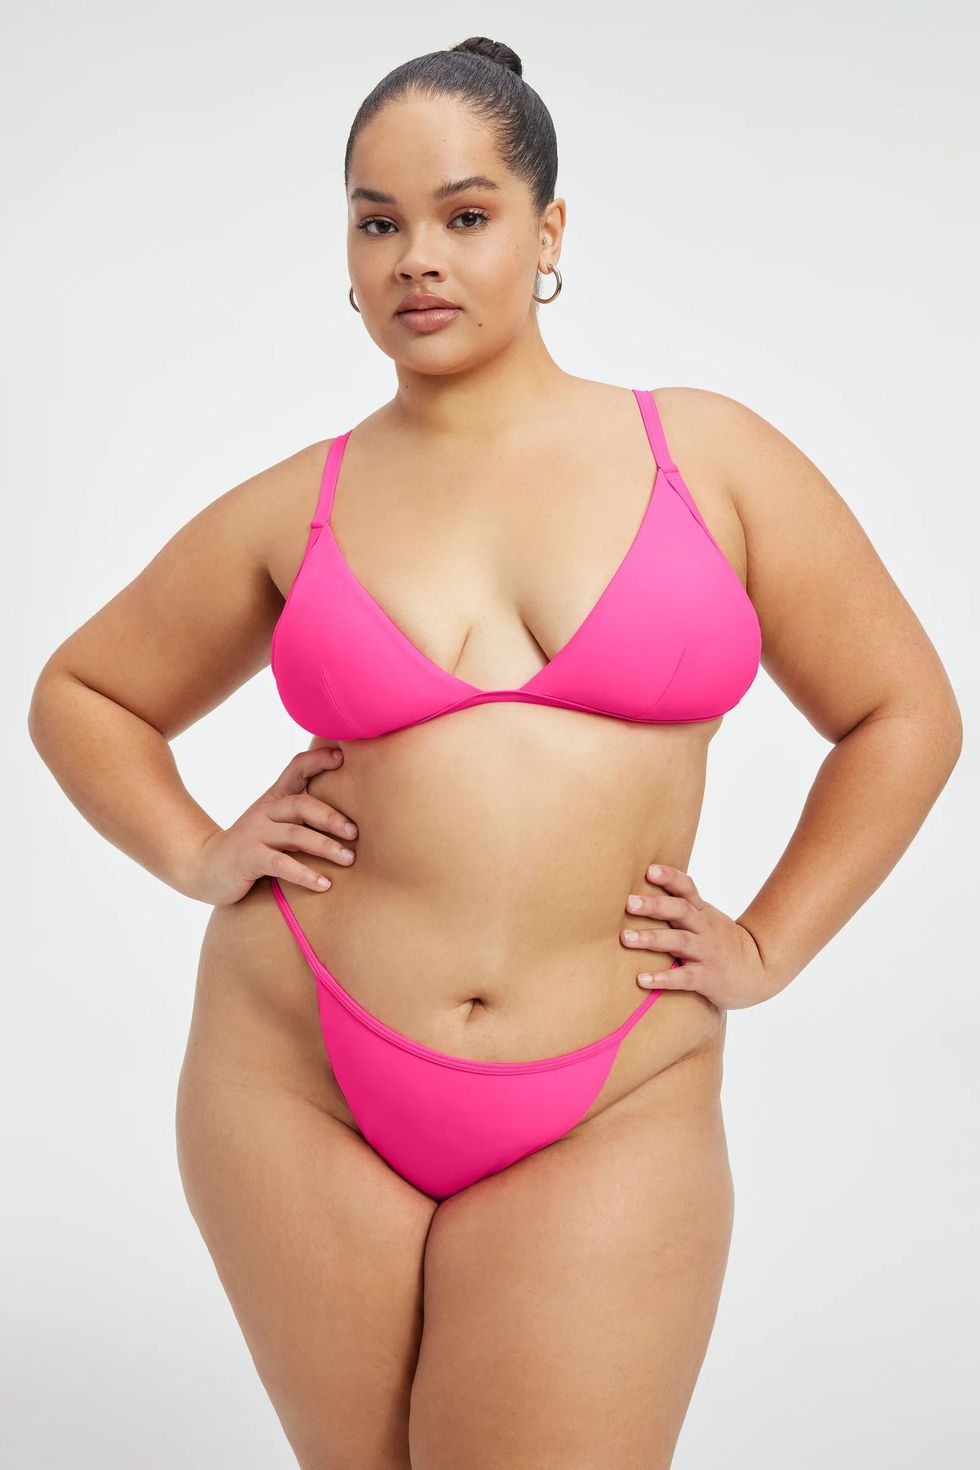 Best Bikinis For a Size 14